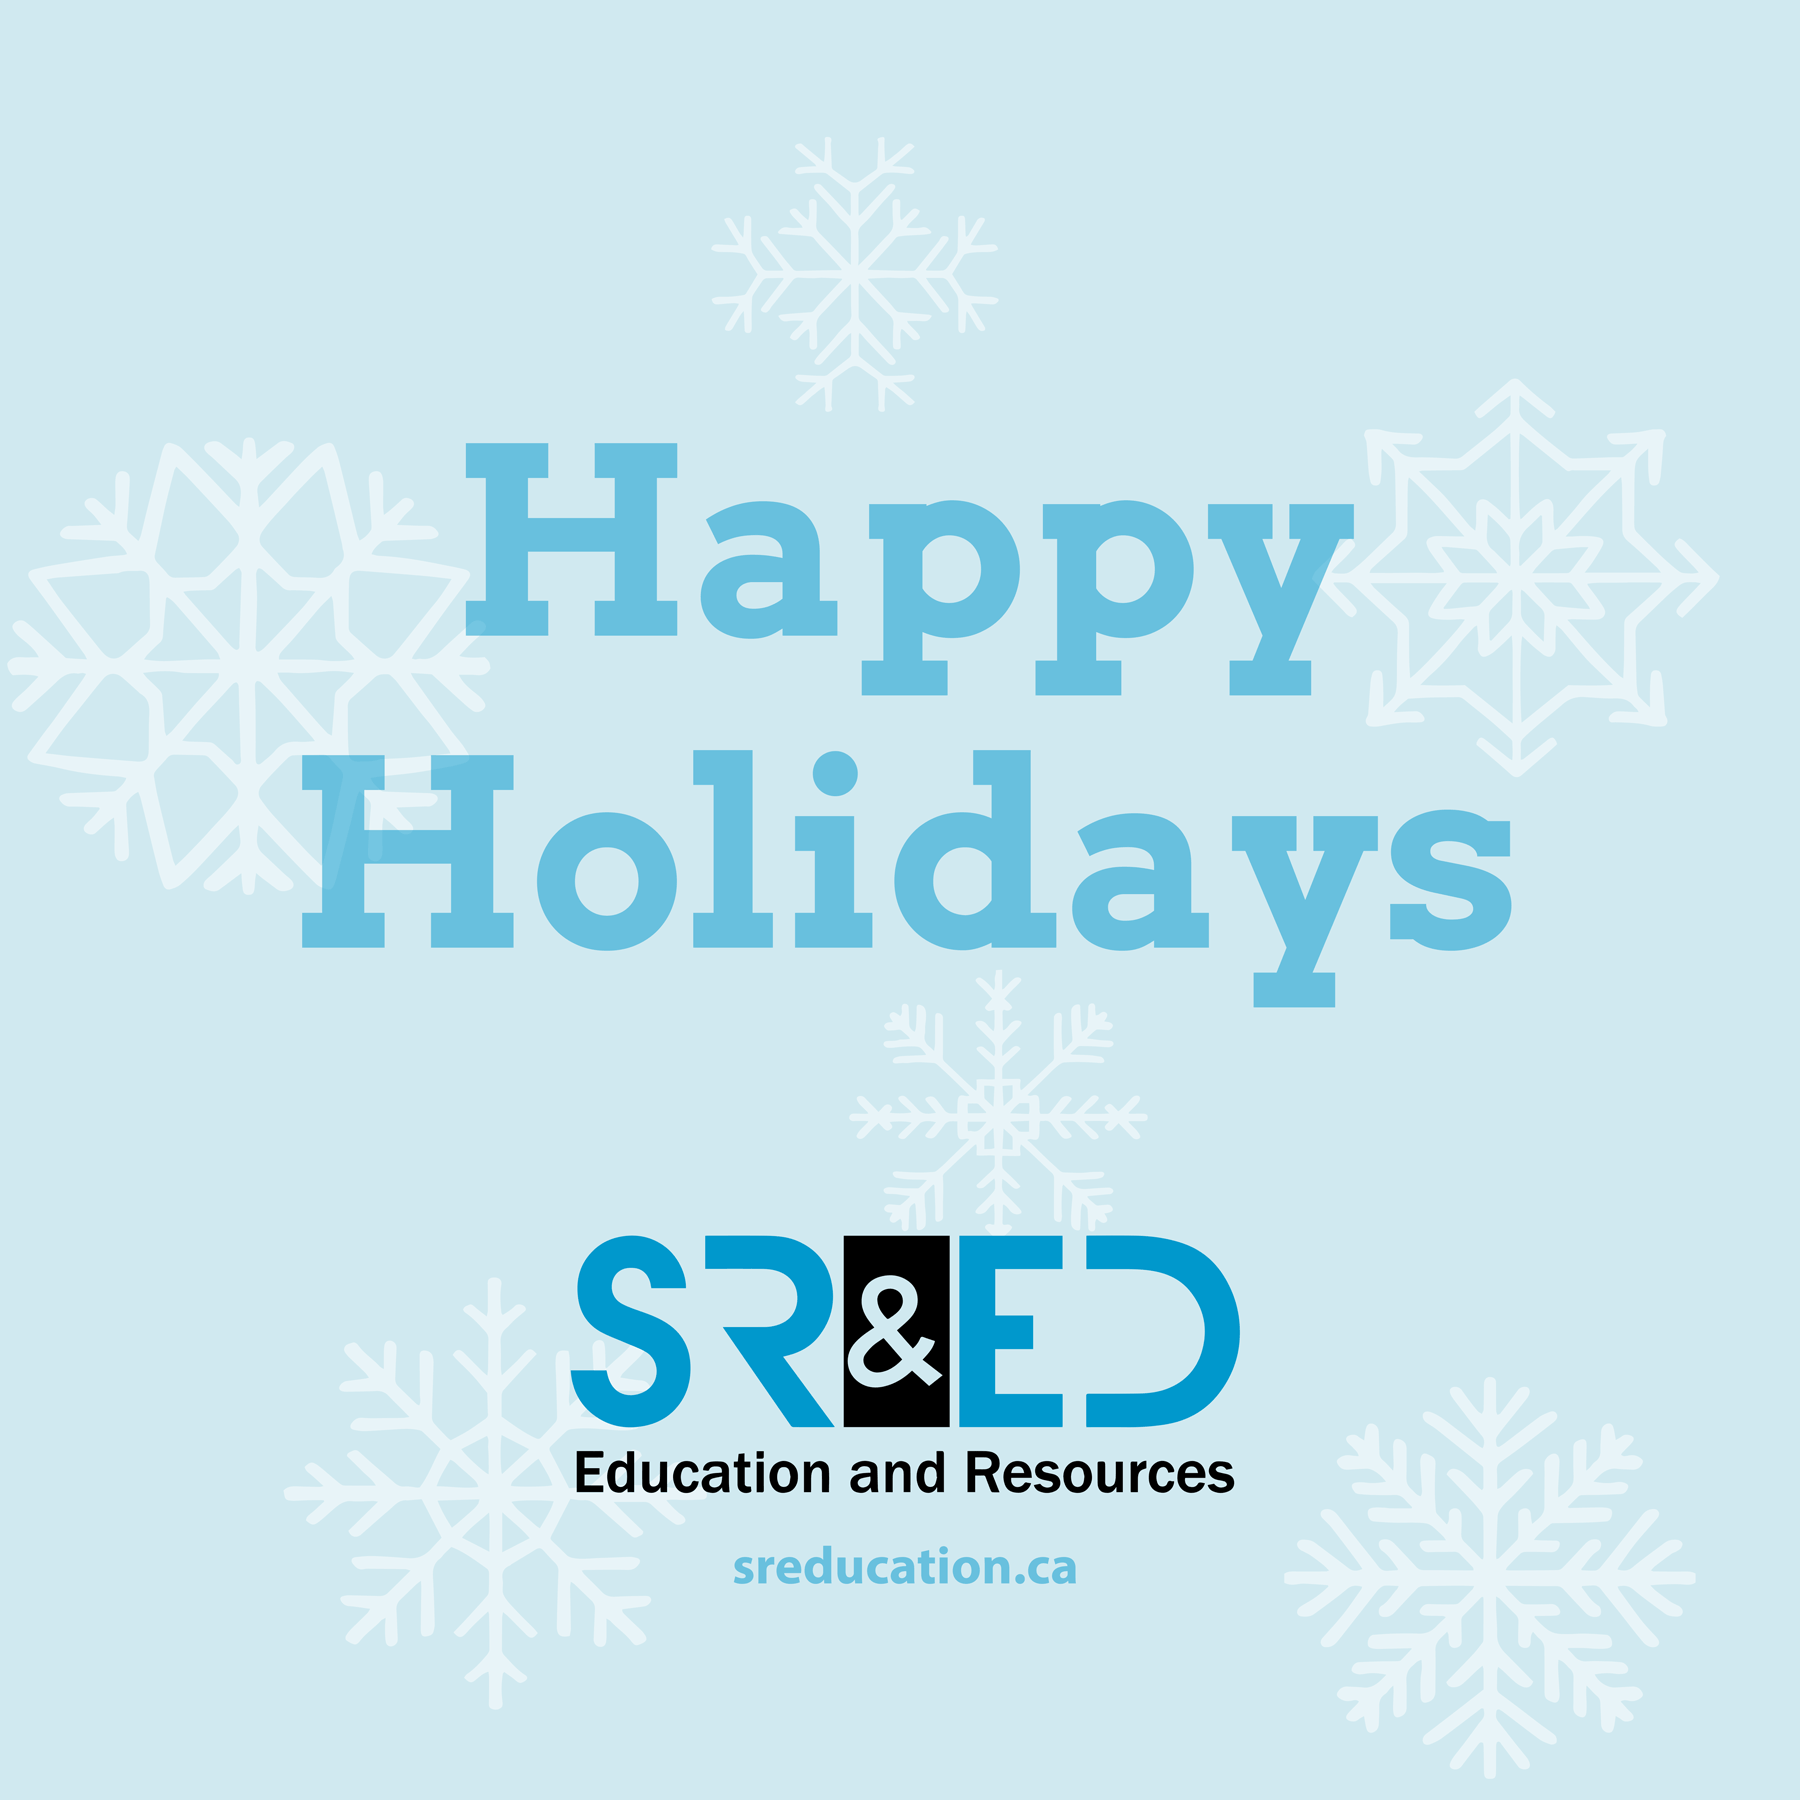 Happy Holidays from SR&ED Education and Resources! (2020)